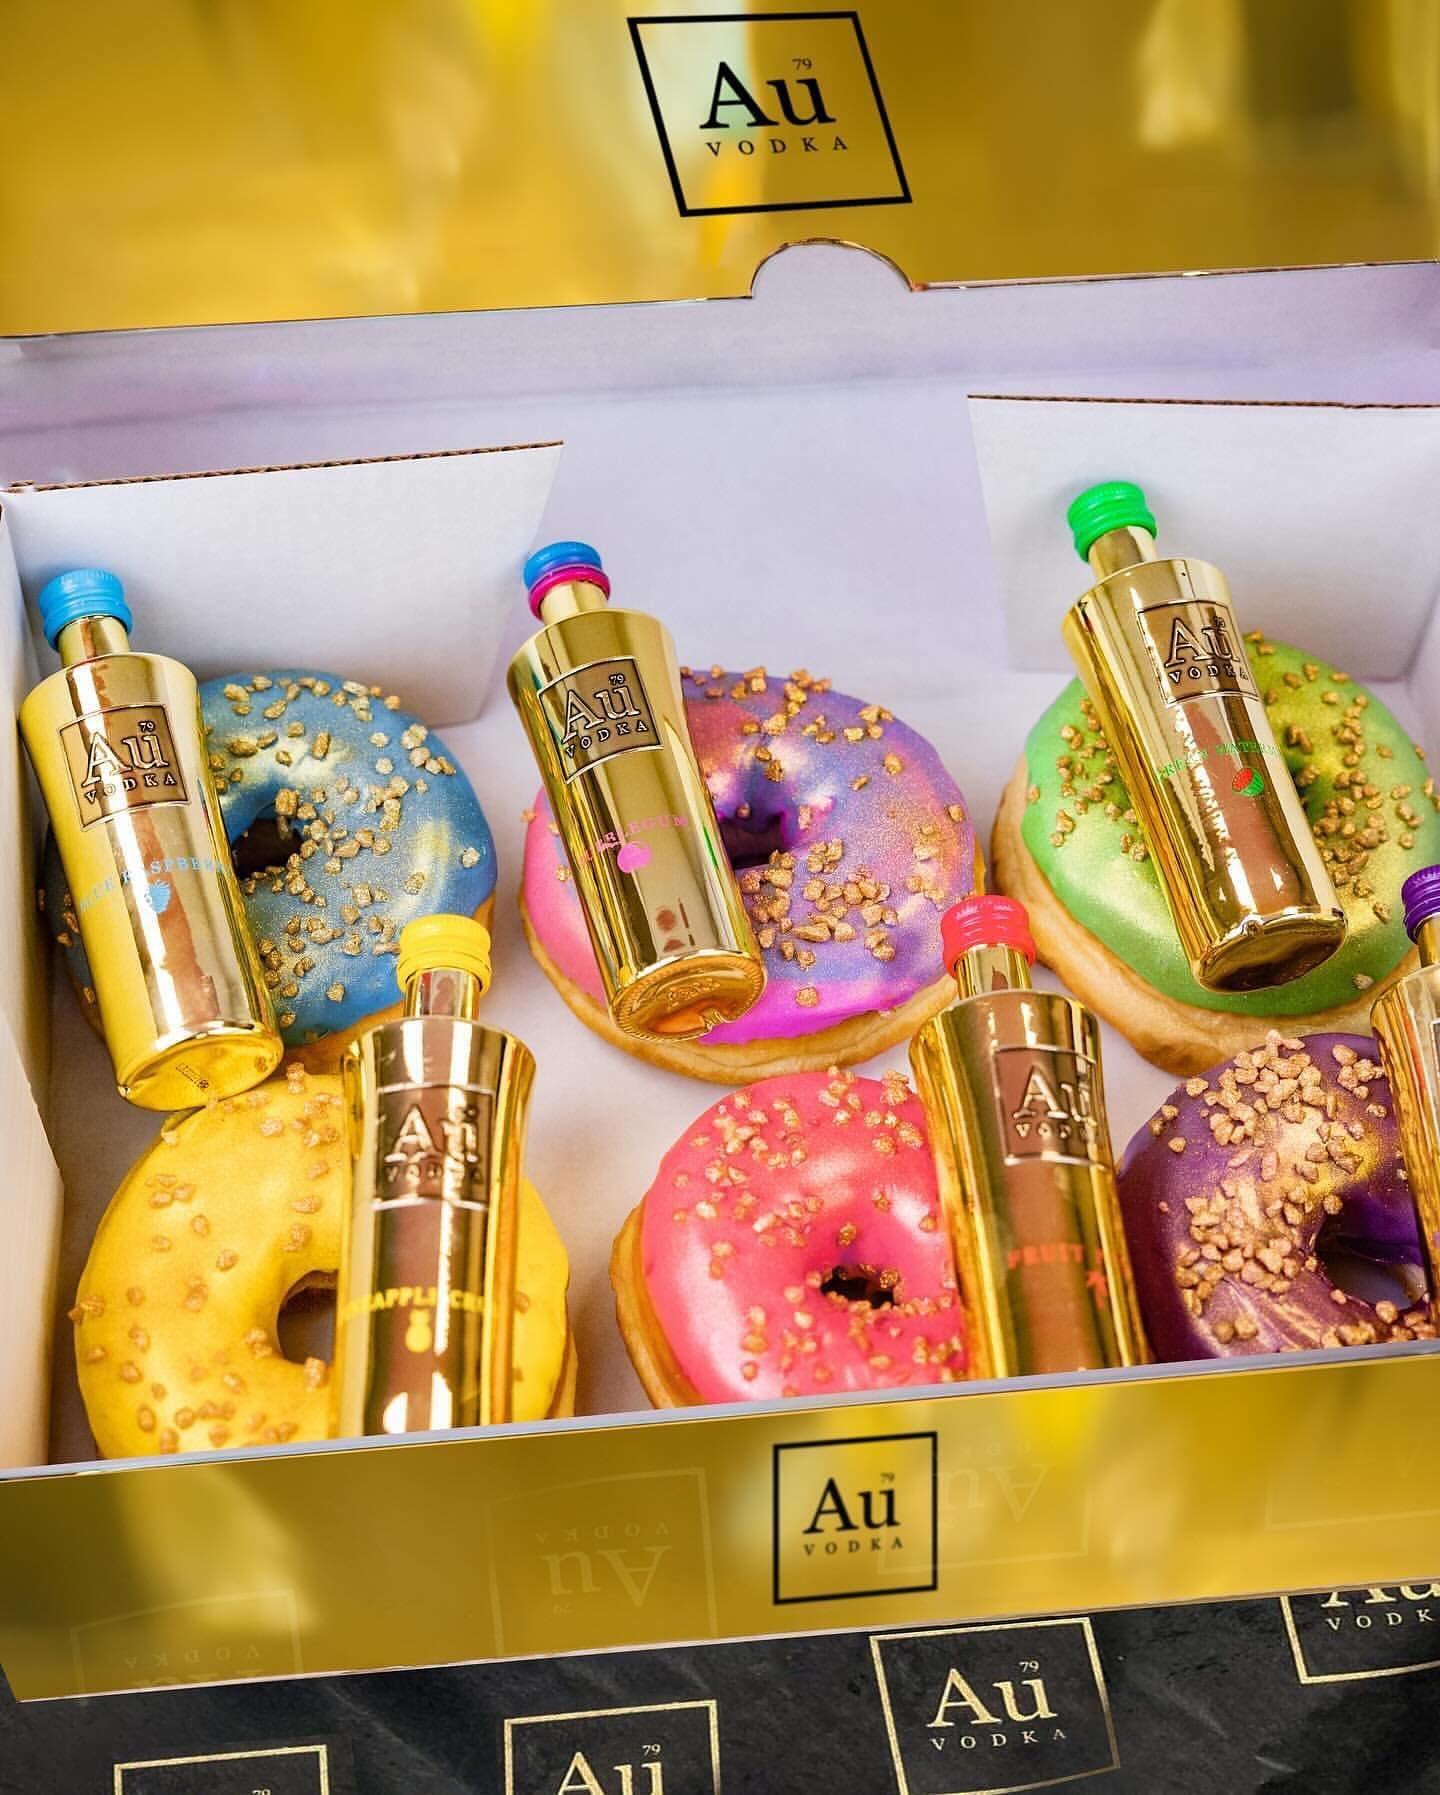 Au Vodka Infused Donuts 🍩🤯 You fancy some new donuts? @dunkin.switzerland 👀 These are 10/10🤤
#auvodka

#auvodkaswitzerland #donuts #dunkindonuts #vodka #dessert #switzerland #donutsofinstagram #donutslover #pleasedrinkresponsibly